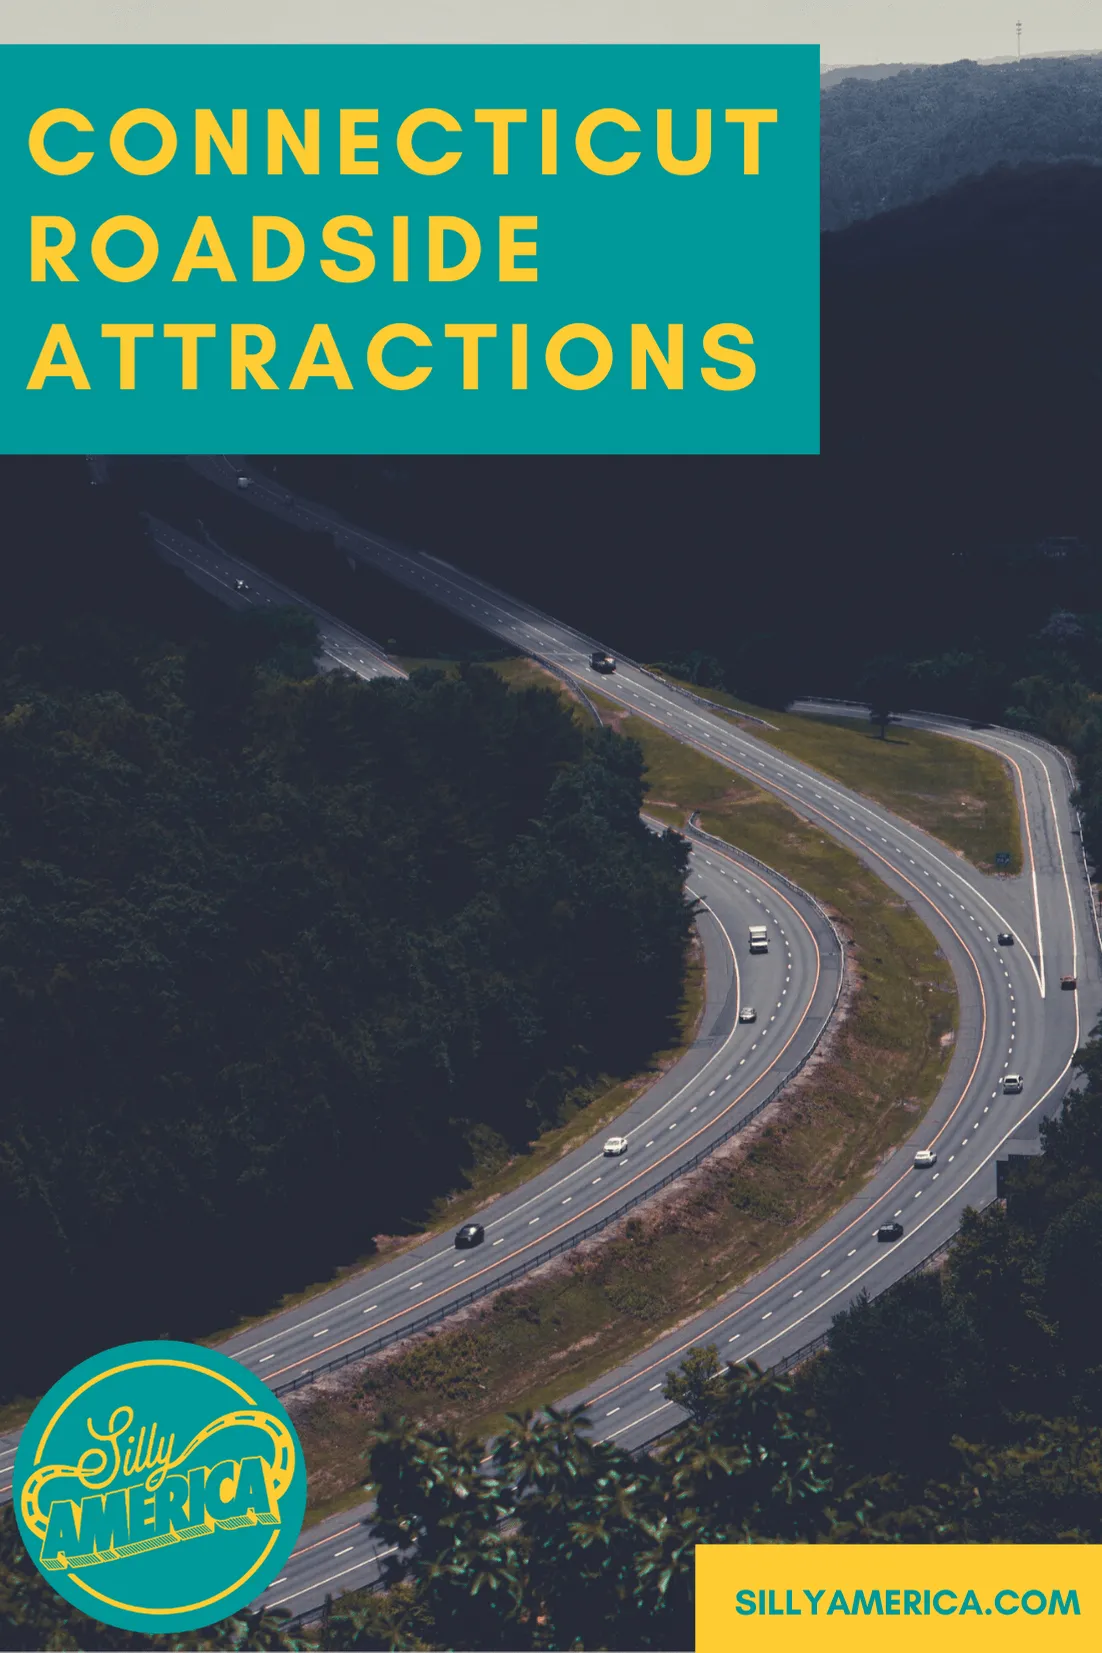 The best Connecticut roadside attractions to visit on a Connecticut road trip. Add these roadside oddities to your travel bucket list, itinerary, or route map! Fun road trip stops for kids or adults! #ConnecticutRoadsideAttractions #ConnecticutRoadsideAttraction #RoadsideAttractions #RoadsideAttraction #ConnecticutRoadTrip #ConnecticutRoadTripItinerary #RoadTrip #WeirdRoadsideAttractions